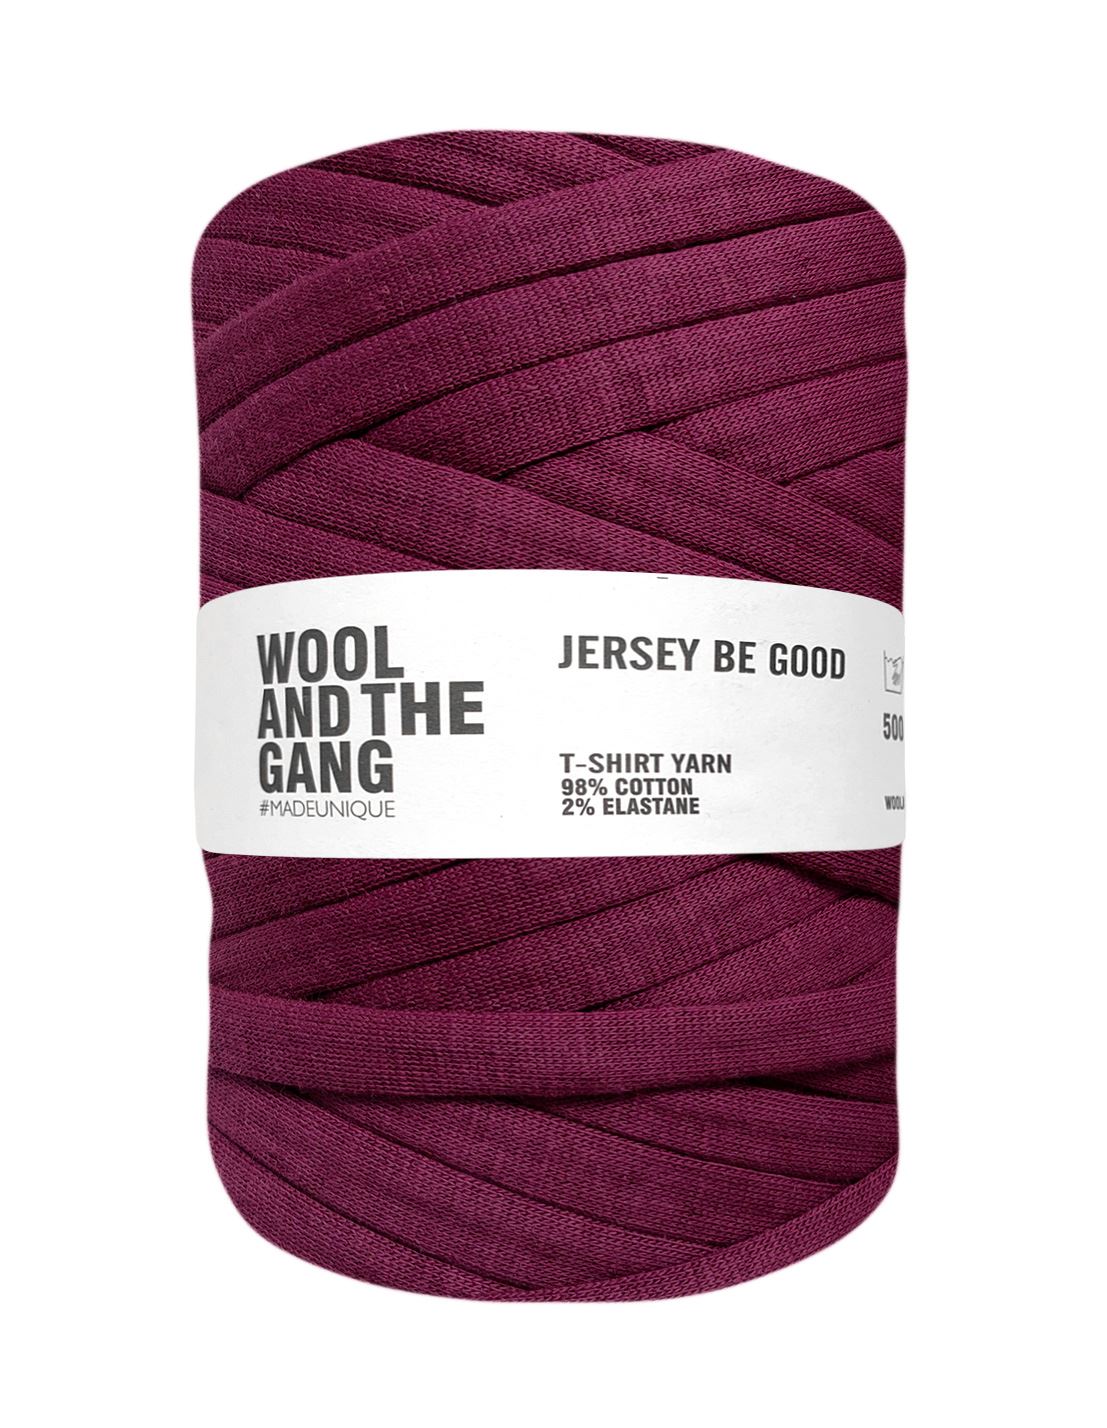 Jam Purple Jersey Be Good t-shirt yarn by Wool and the Gang (500g)